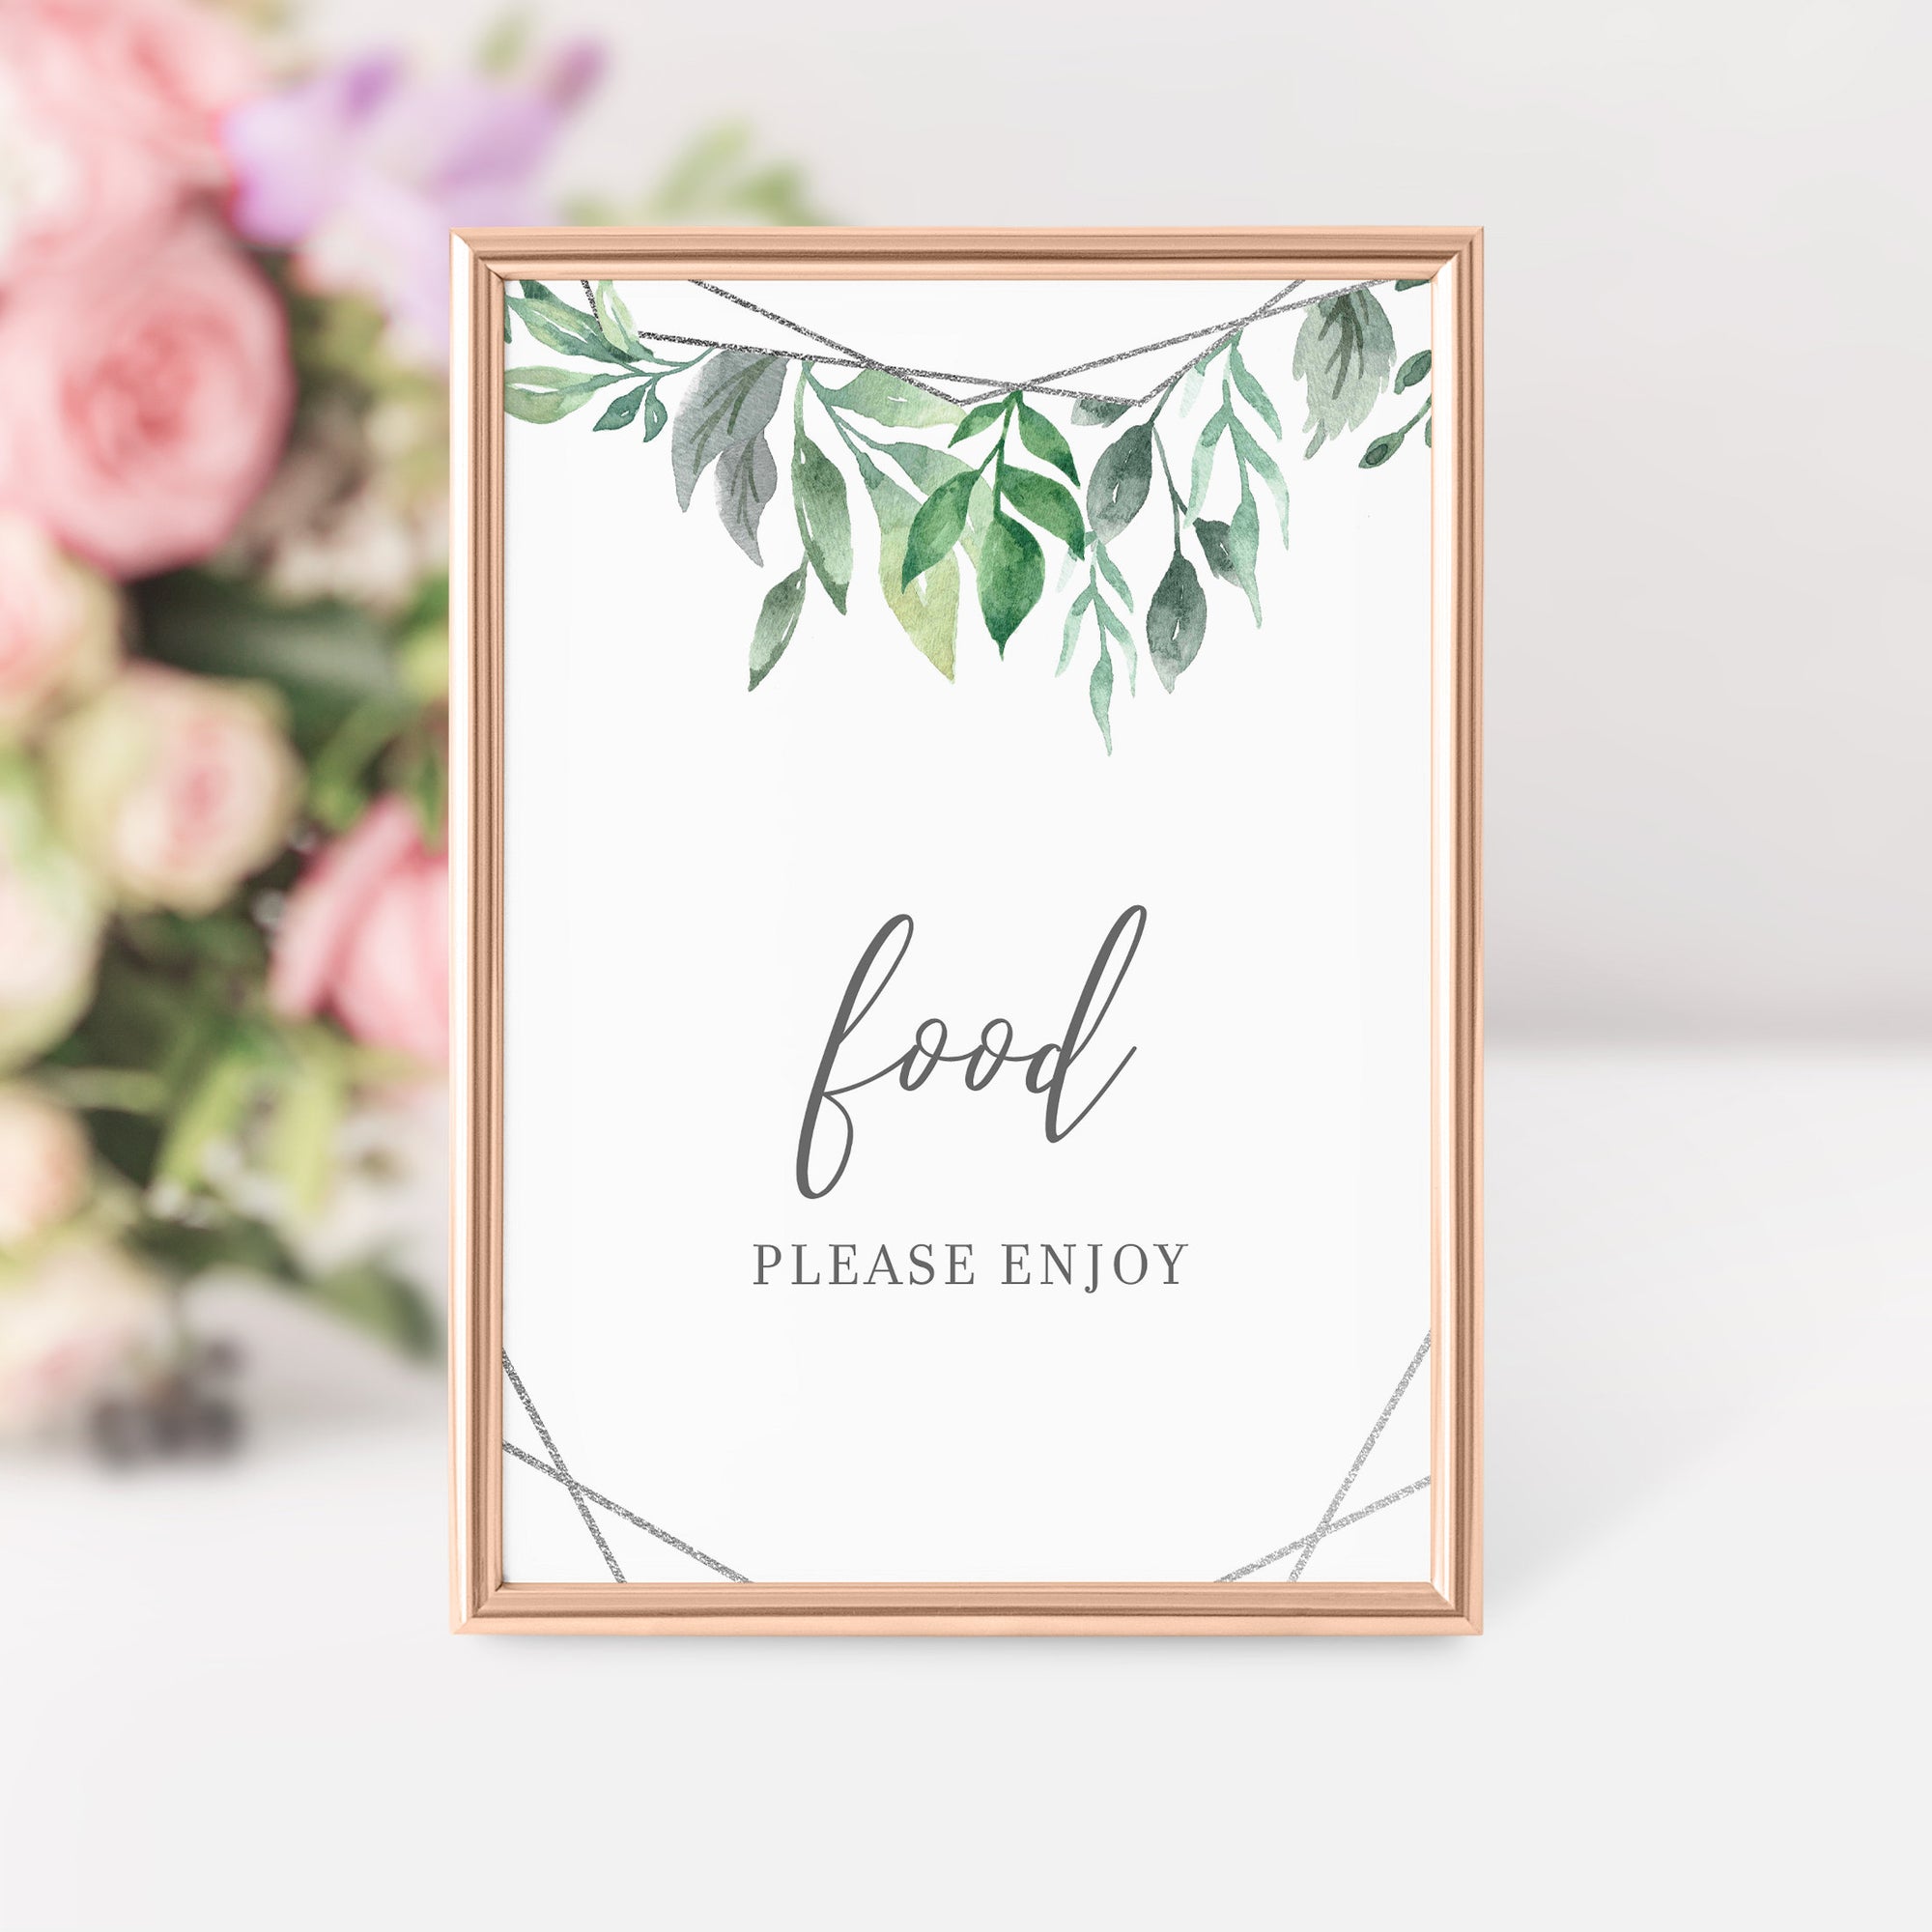 Geometric Silver Greenery Printable Food Sign INSTANT DOWNLOAD, Bridal Shower, Baby Shower, Wedding Decorations and Supplies - GFS100 - @PlumPolkaDot 